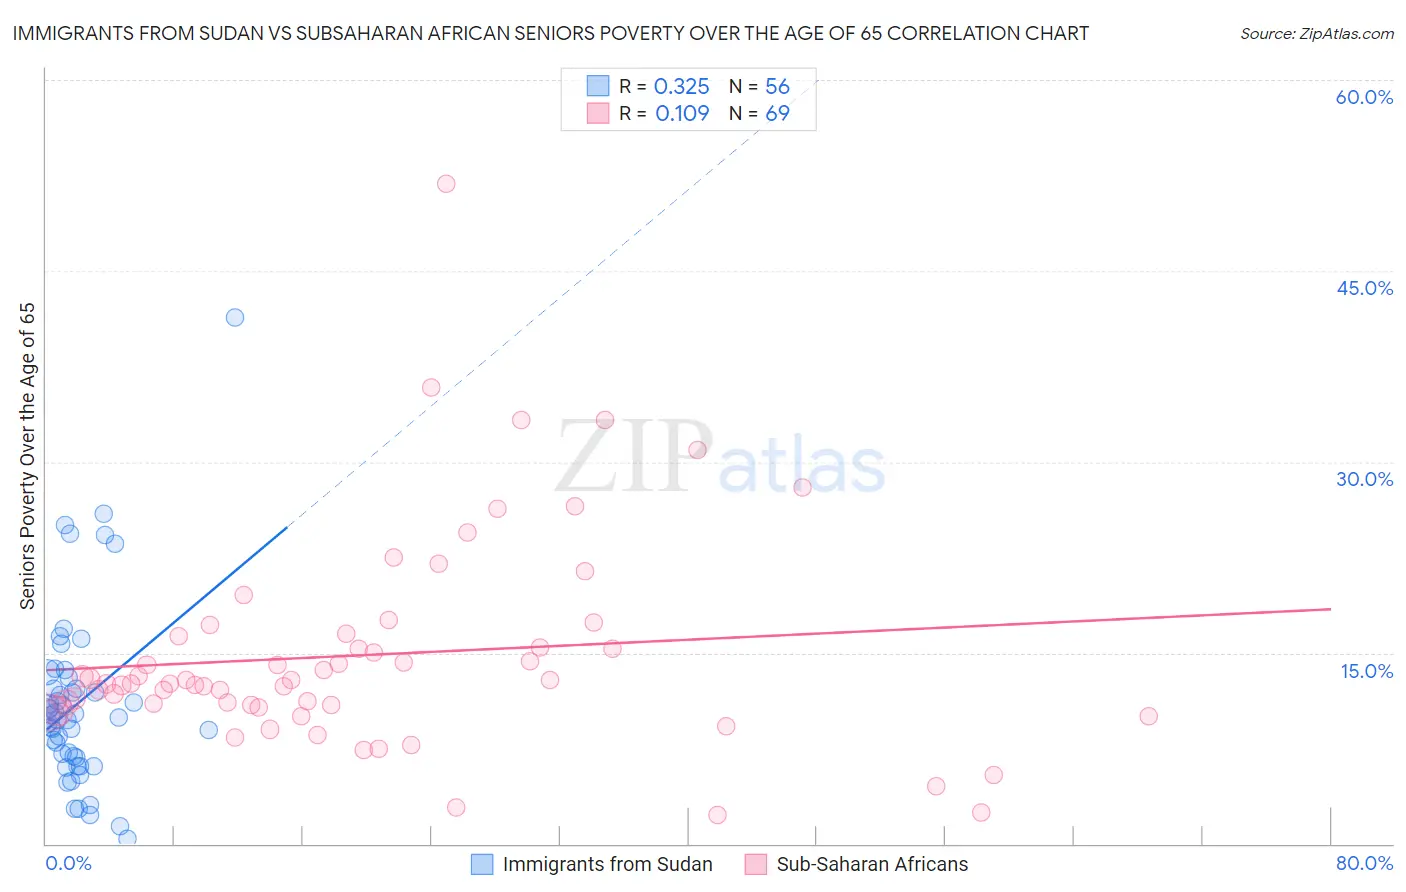 Immigrants from Sudan vs Subsaharan African Seniors Poverty Over the Age of 65